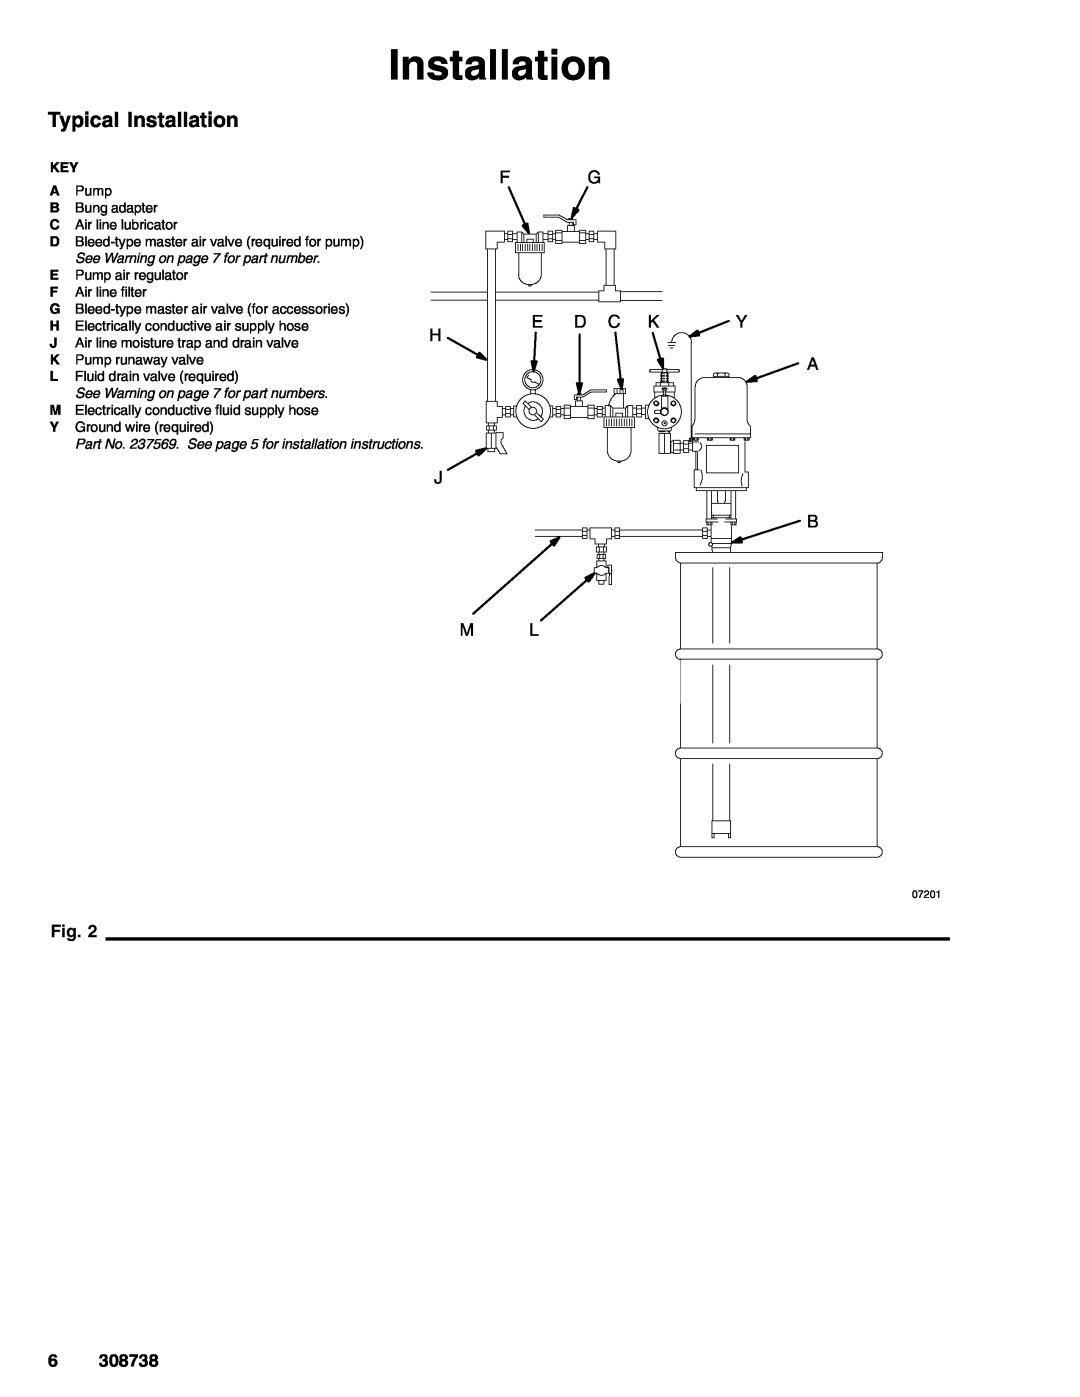 Graco 308738C manual Typical Installation, 6308738, F G E D C K Y H A J B, See Warning on page 7 for part numbers 